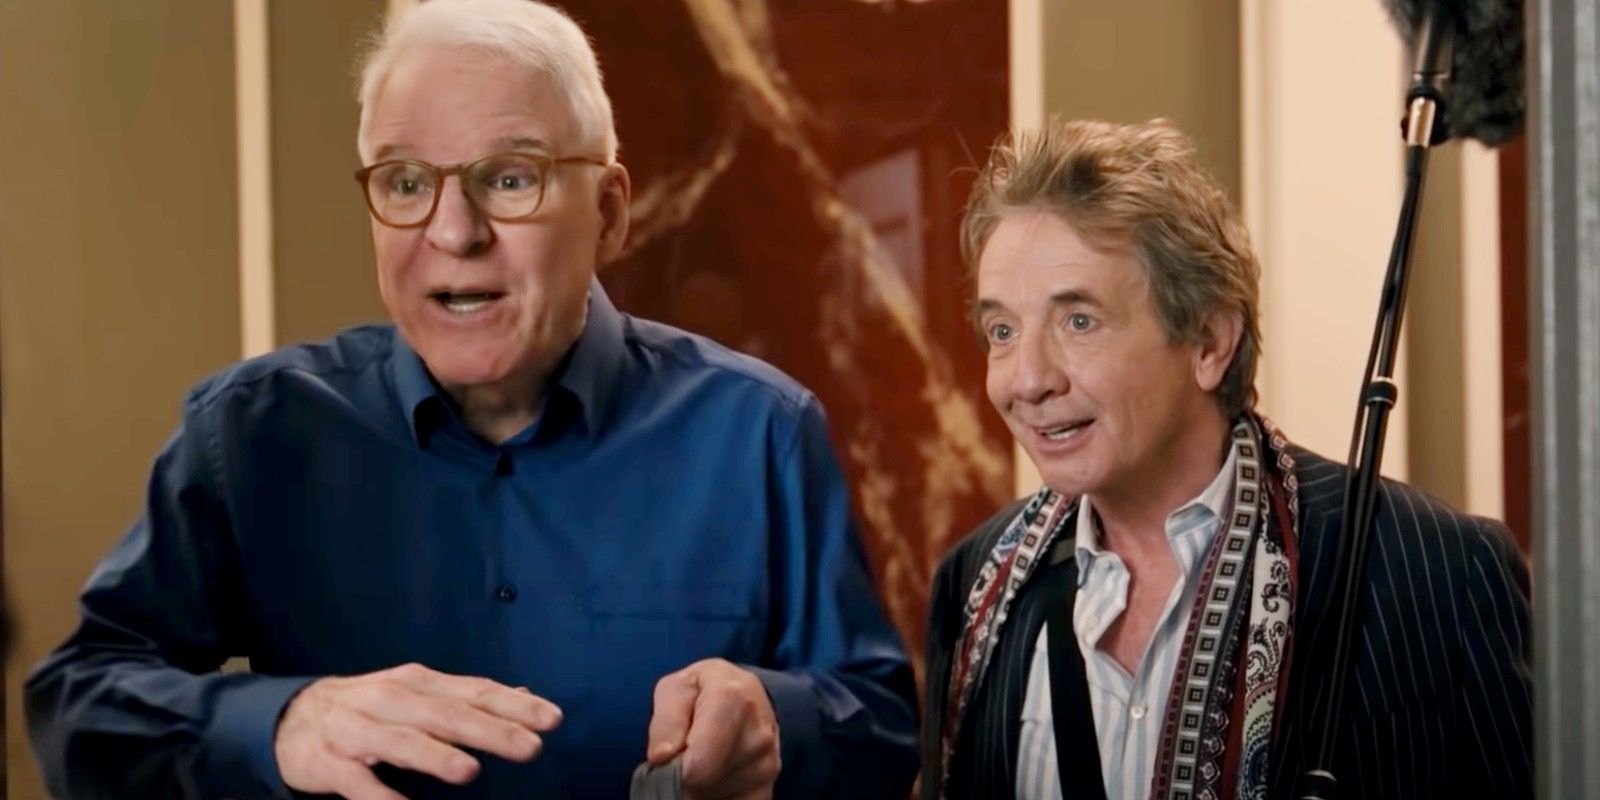 Steve Martin and Martin Short in Only Murders in the Building